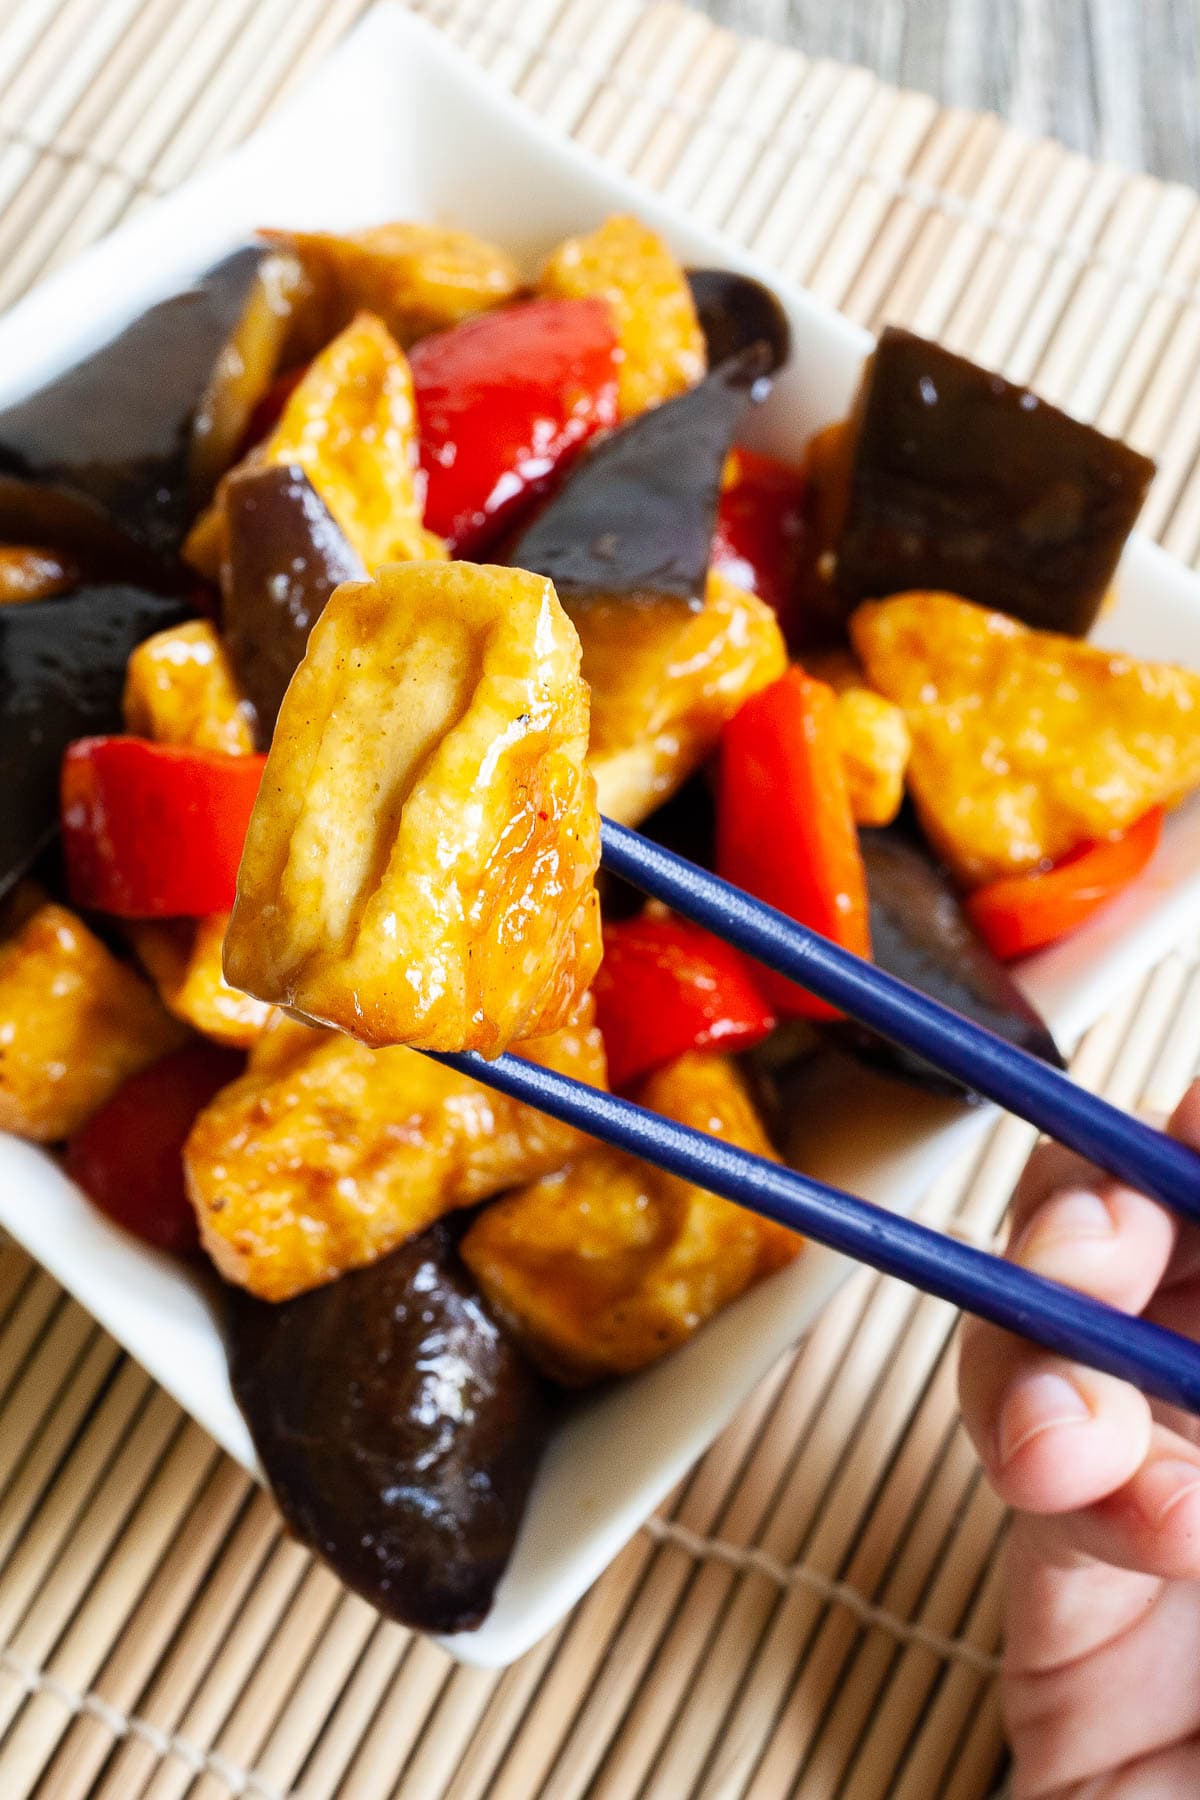 White rectangular plate full of large purple eggplant chunks, puffy brown glazed tofu and red peppers. Blue chopsticks are taking one tofu piece and holding it up in the air. 